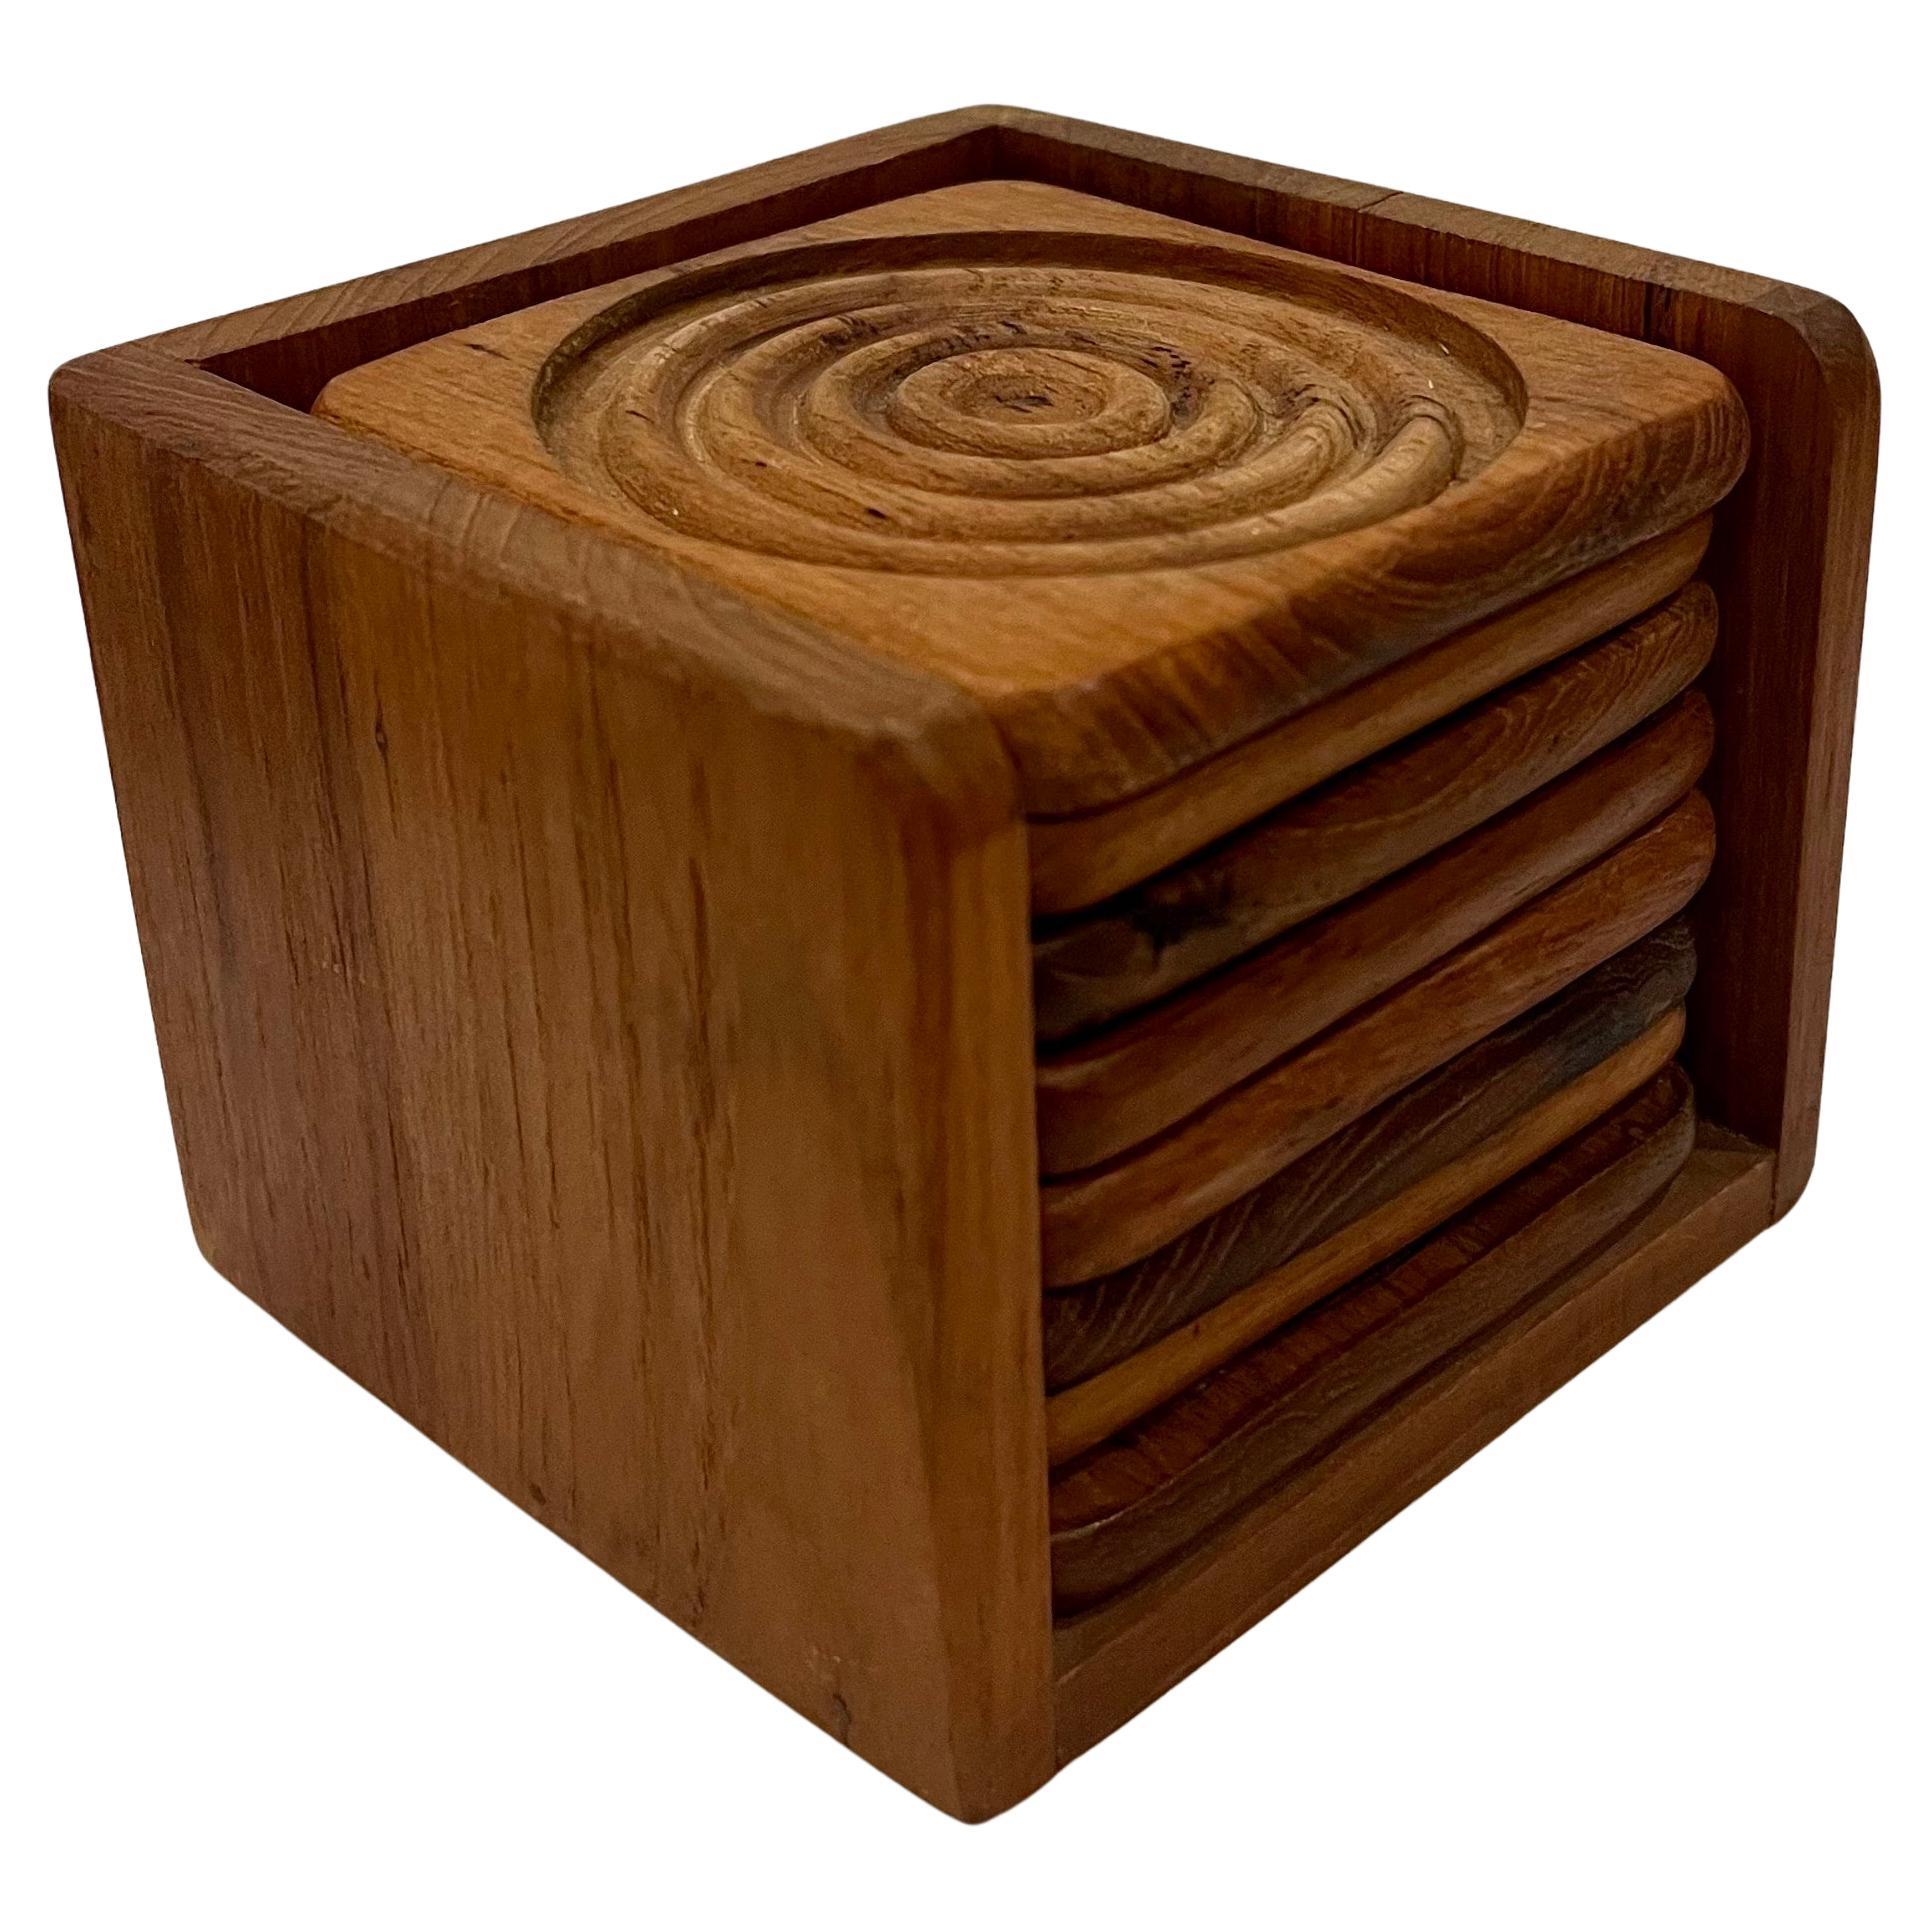 Mid-Century Danish Modern teak coaster set with caddy in the style of Dansk. Concave design. Includes 8 

Each coaster is 4